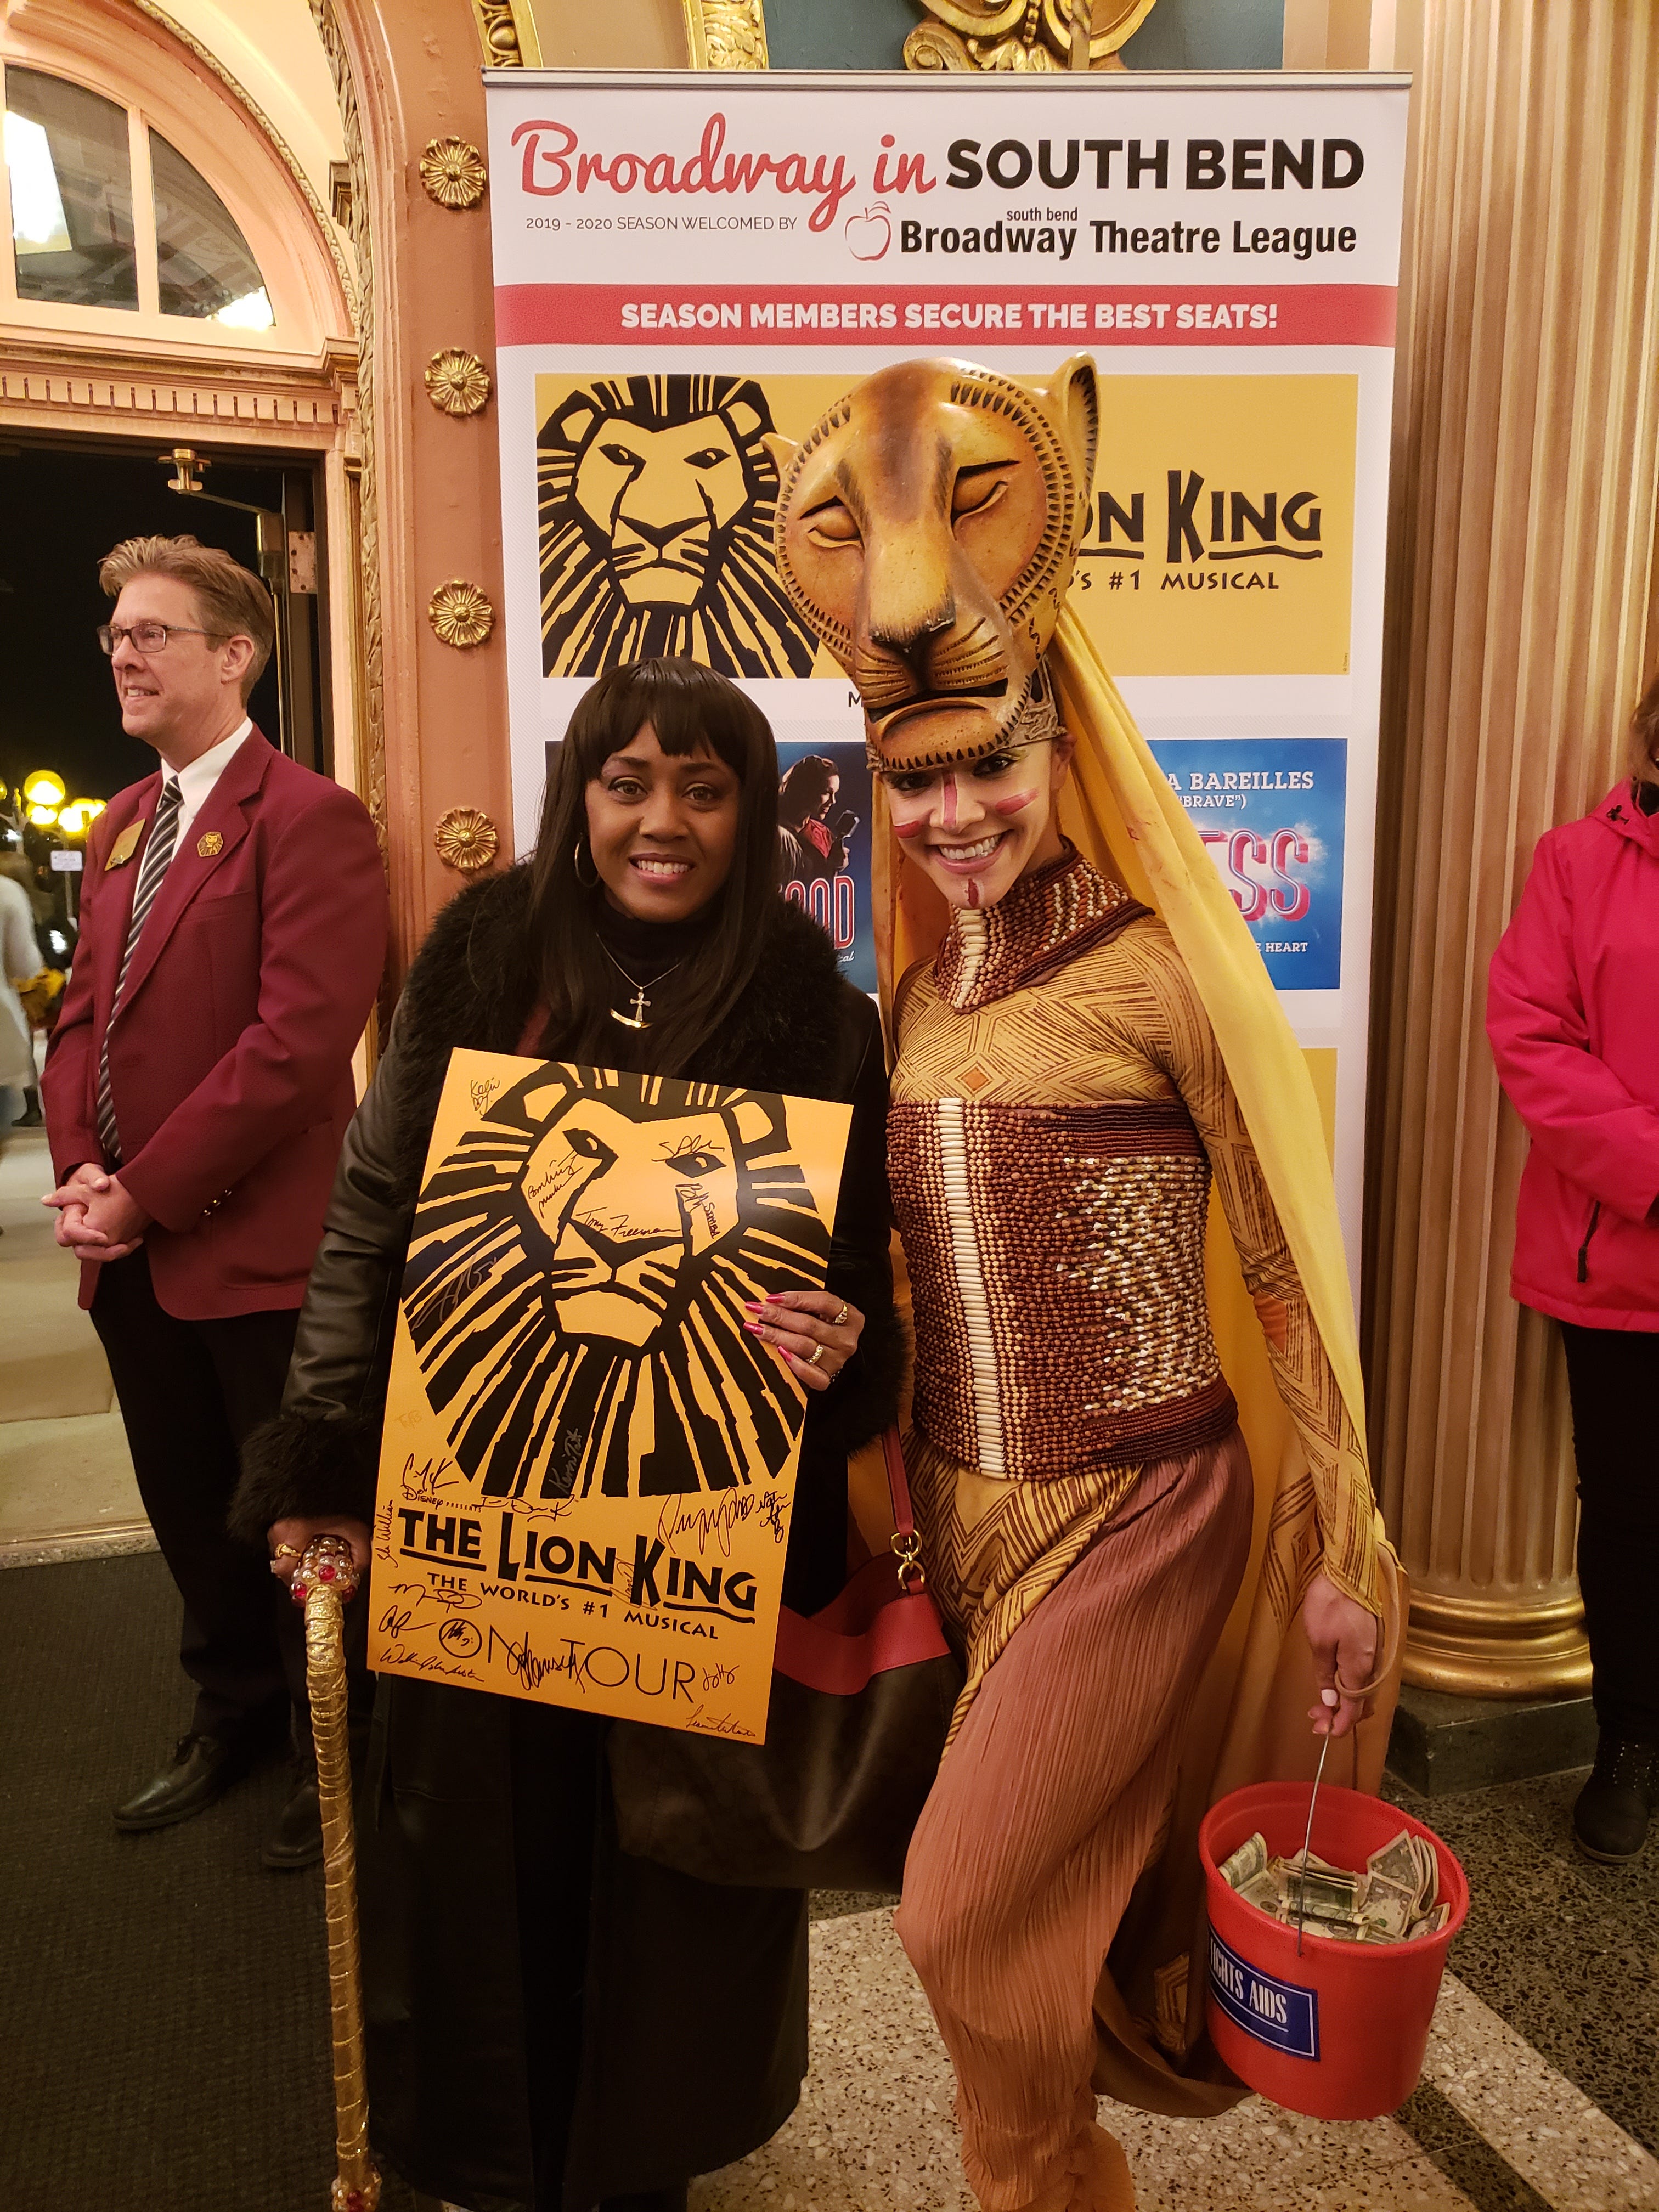 Trina Detwiler poses with an American Theatre Guild employee dressed as a lion at a performance of "The Lion King" at the Morris Performing Arts Center in South Bend. She calls that one of the best performances she's seen at the venue in her "Morris Memories" submission.